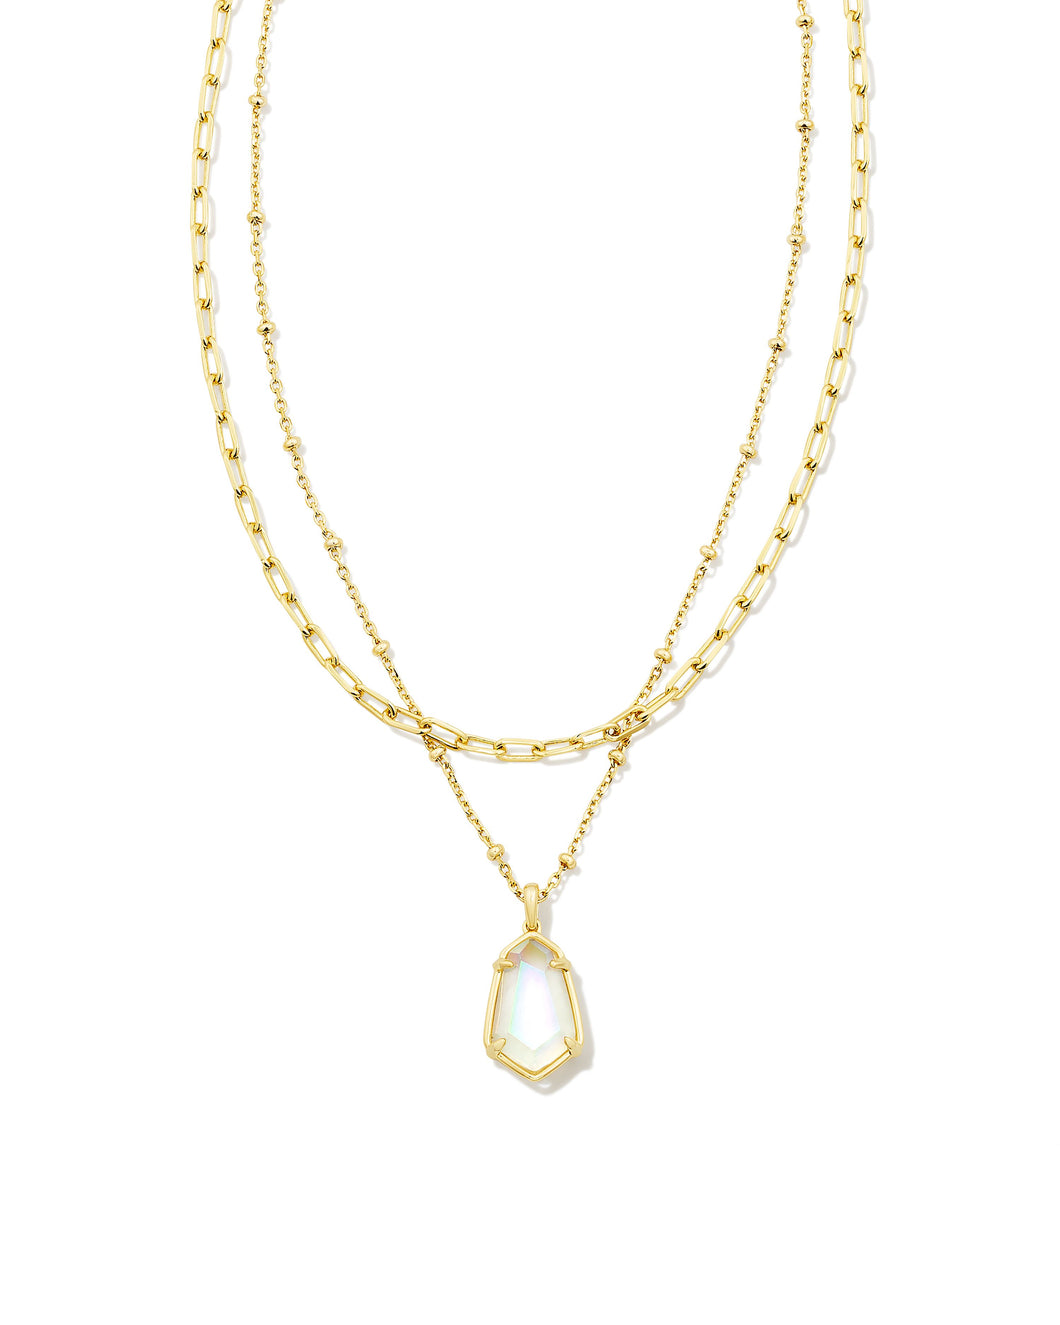 Alexandria Gold Multi Strand Necklace in Iridescent Clear Rock Crystal